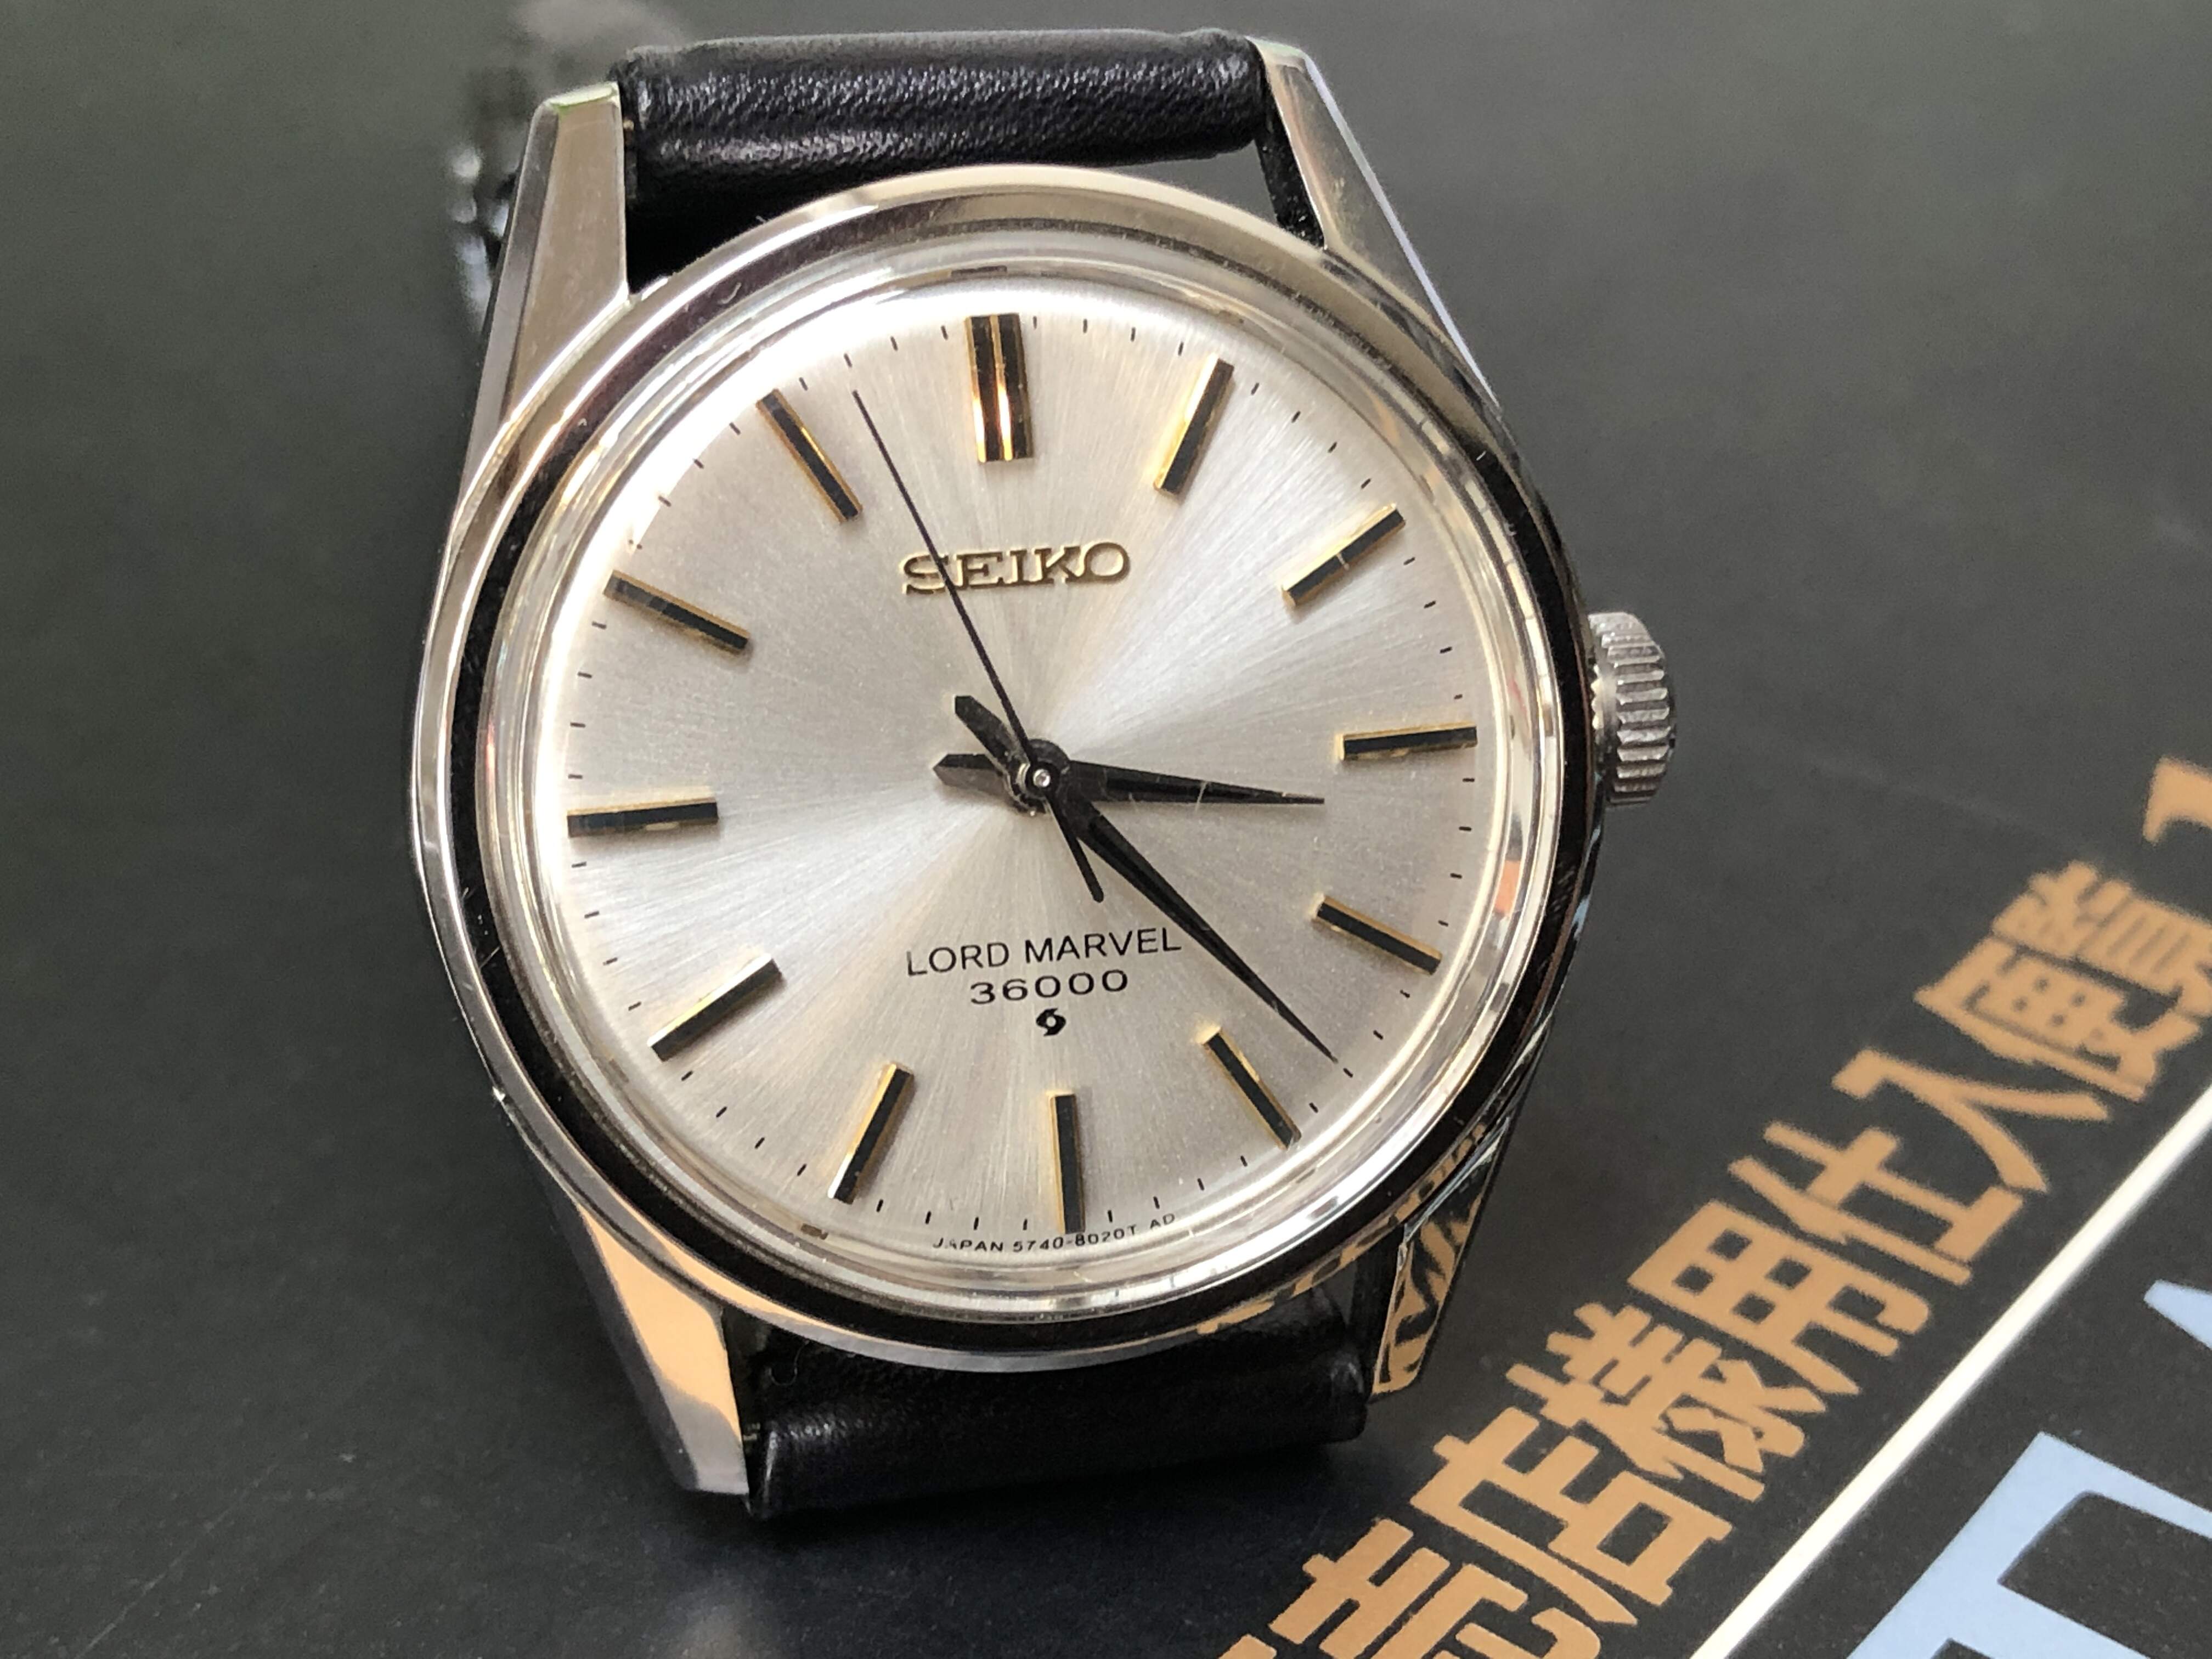 Seiko Lord Marvel 5740-8000 LM36-040 (Sold)